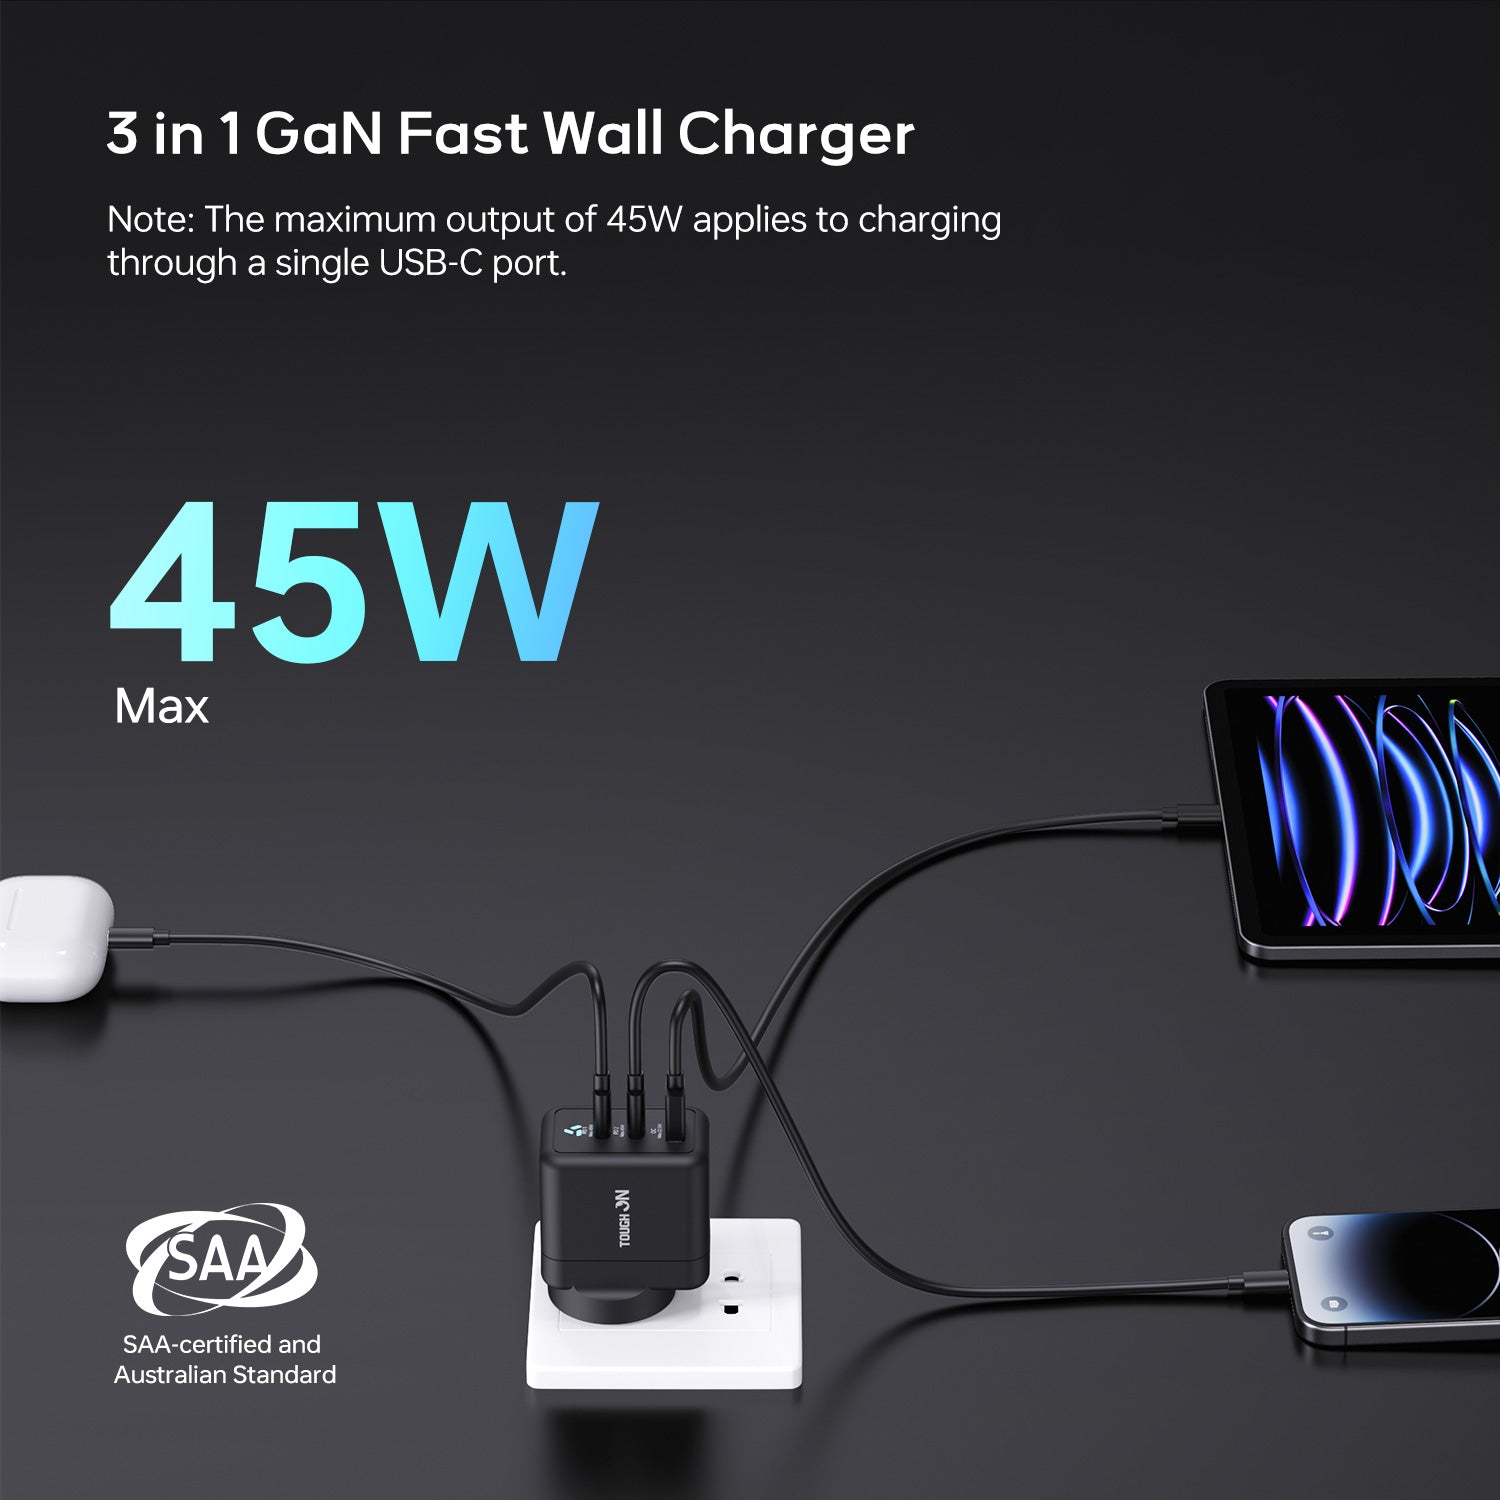 Tough On 45W 3 Port PD & QC 3.0 Fast Wall Charger